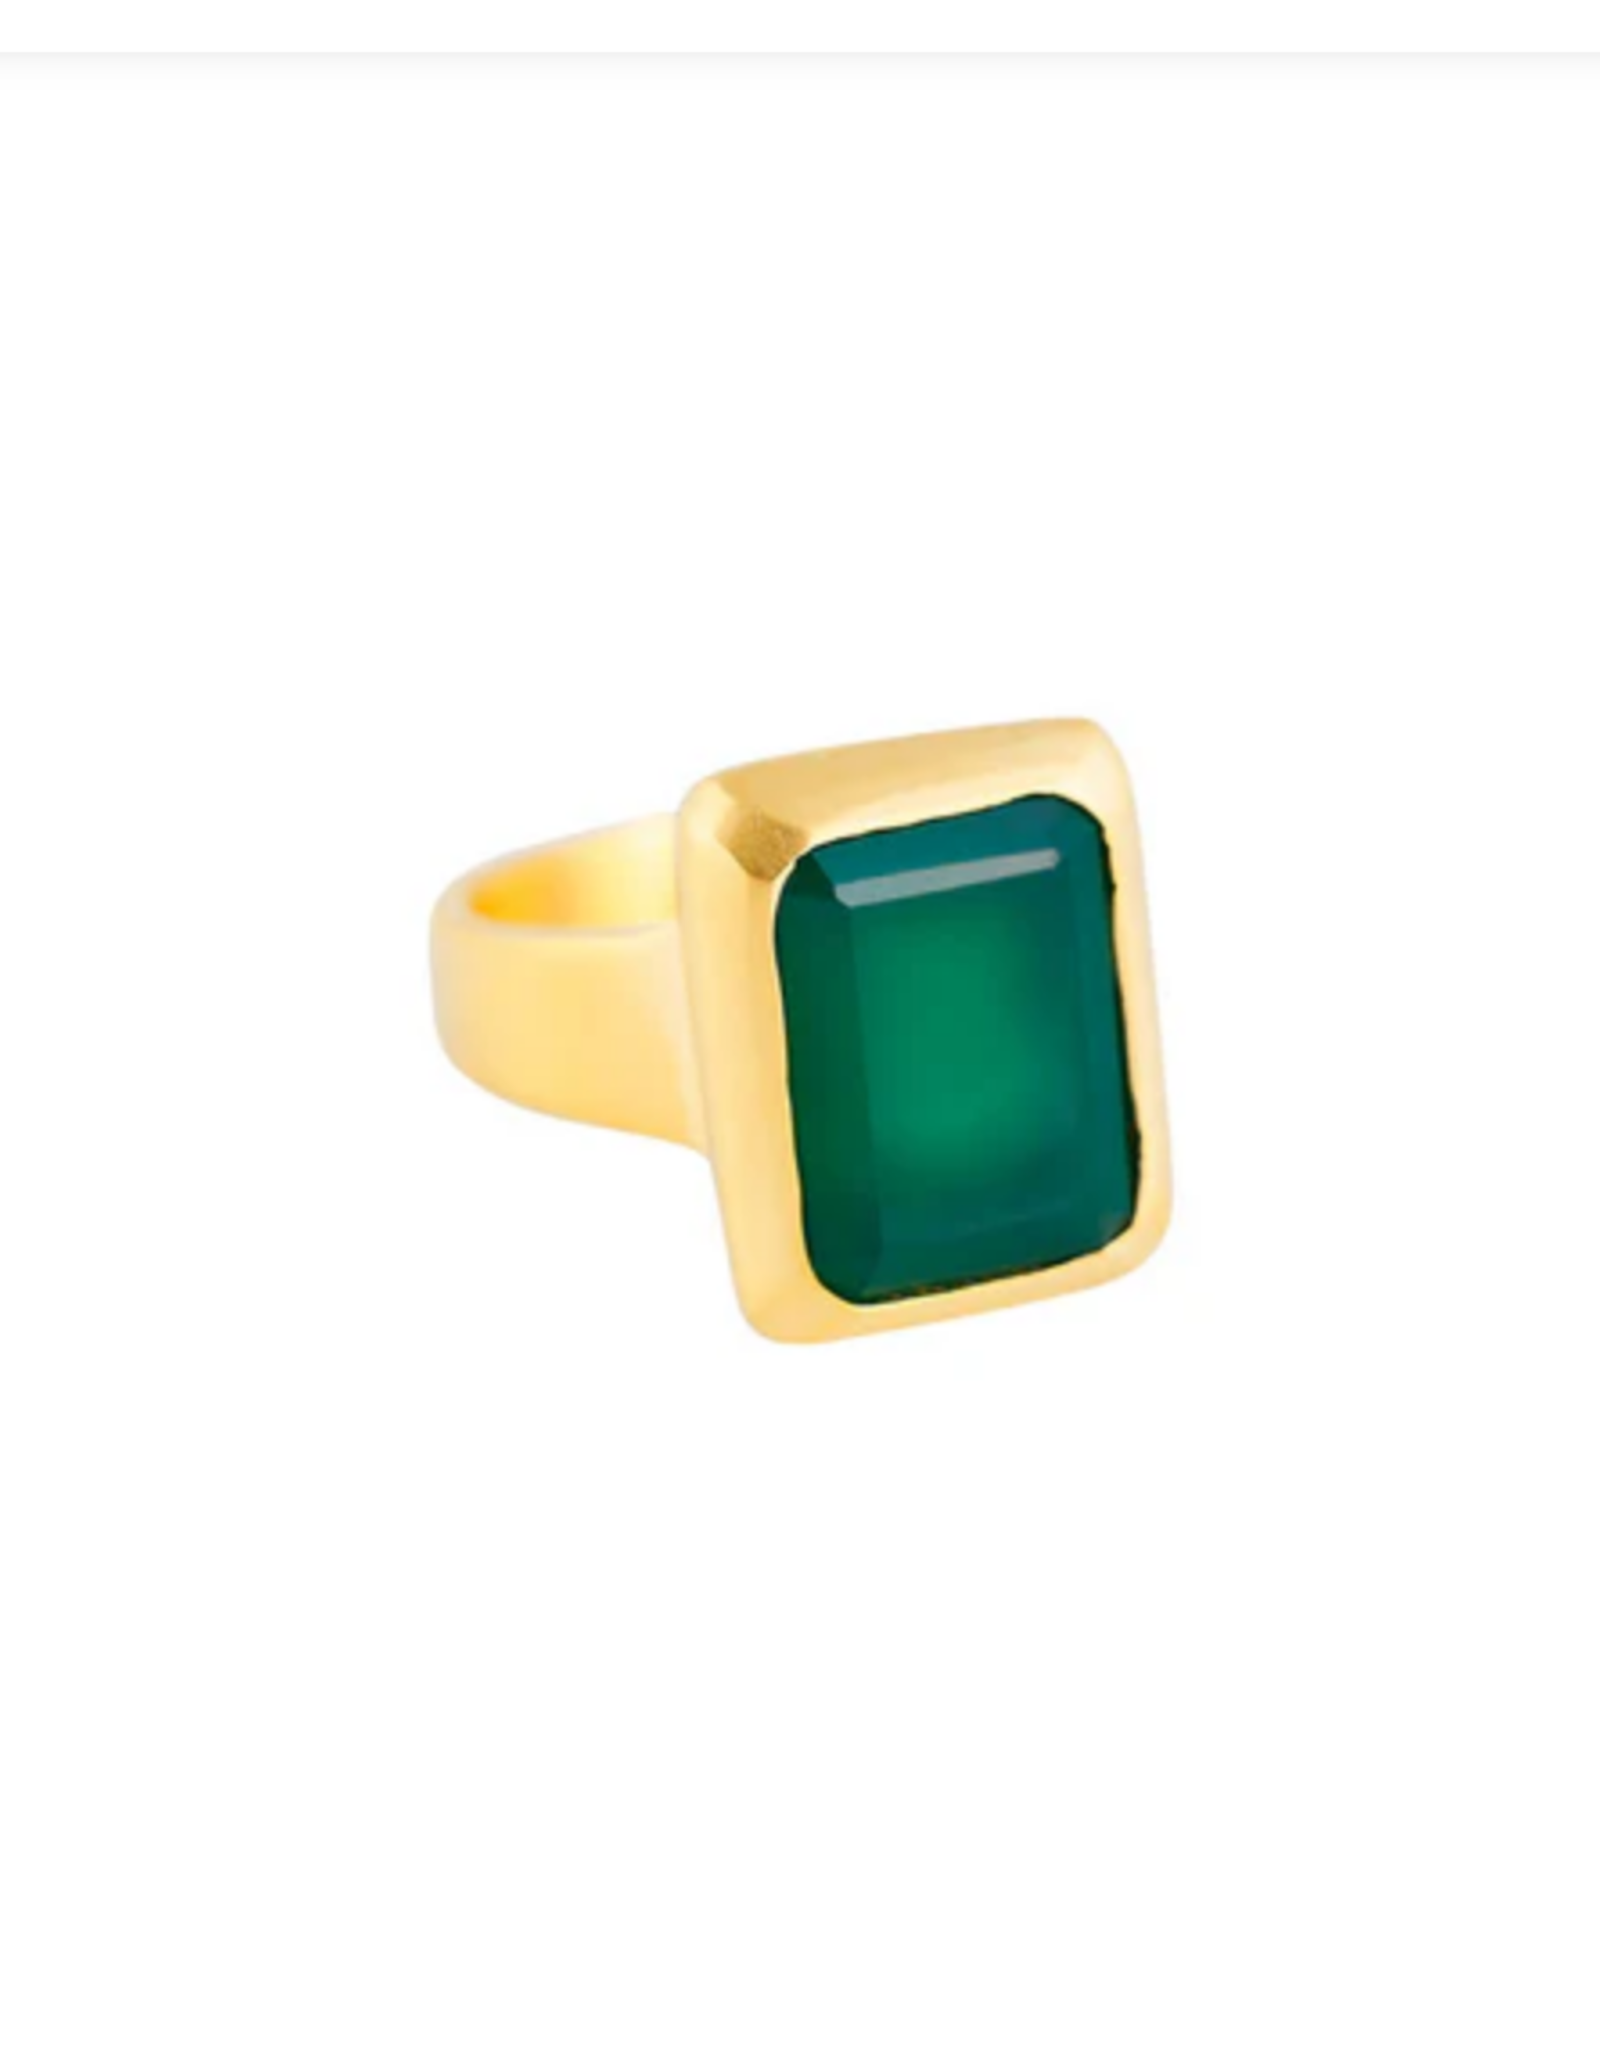 FAIRLEY GREEN AGATE DECO COCKTAIL RING SIZE 9